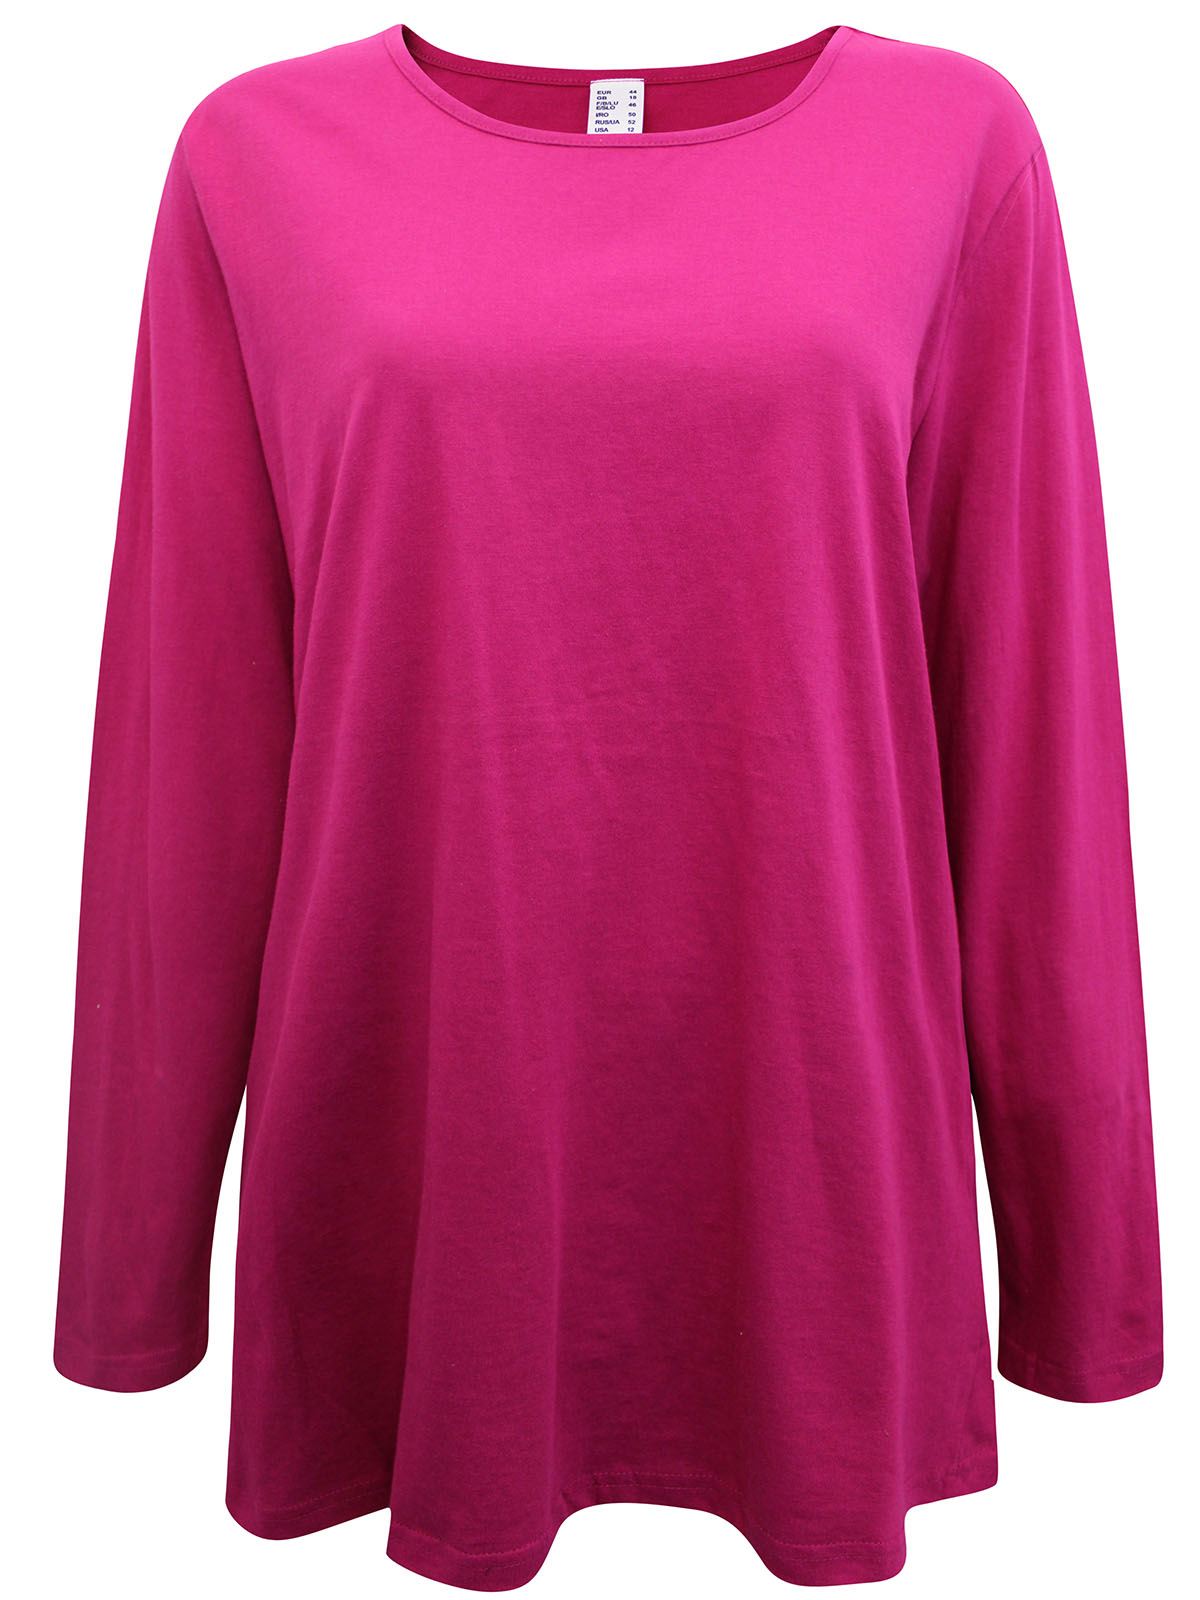 OTTO Group - - CERISE Pure Cotton Long Sleeve Top - Plus Size 18 to 30